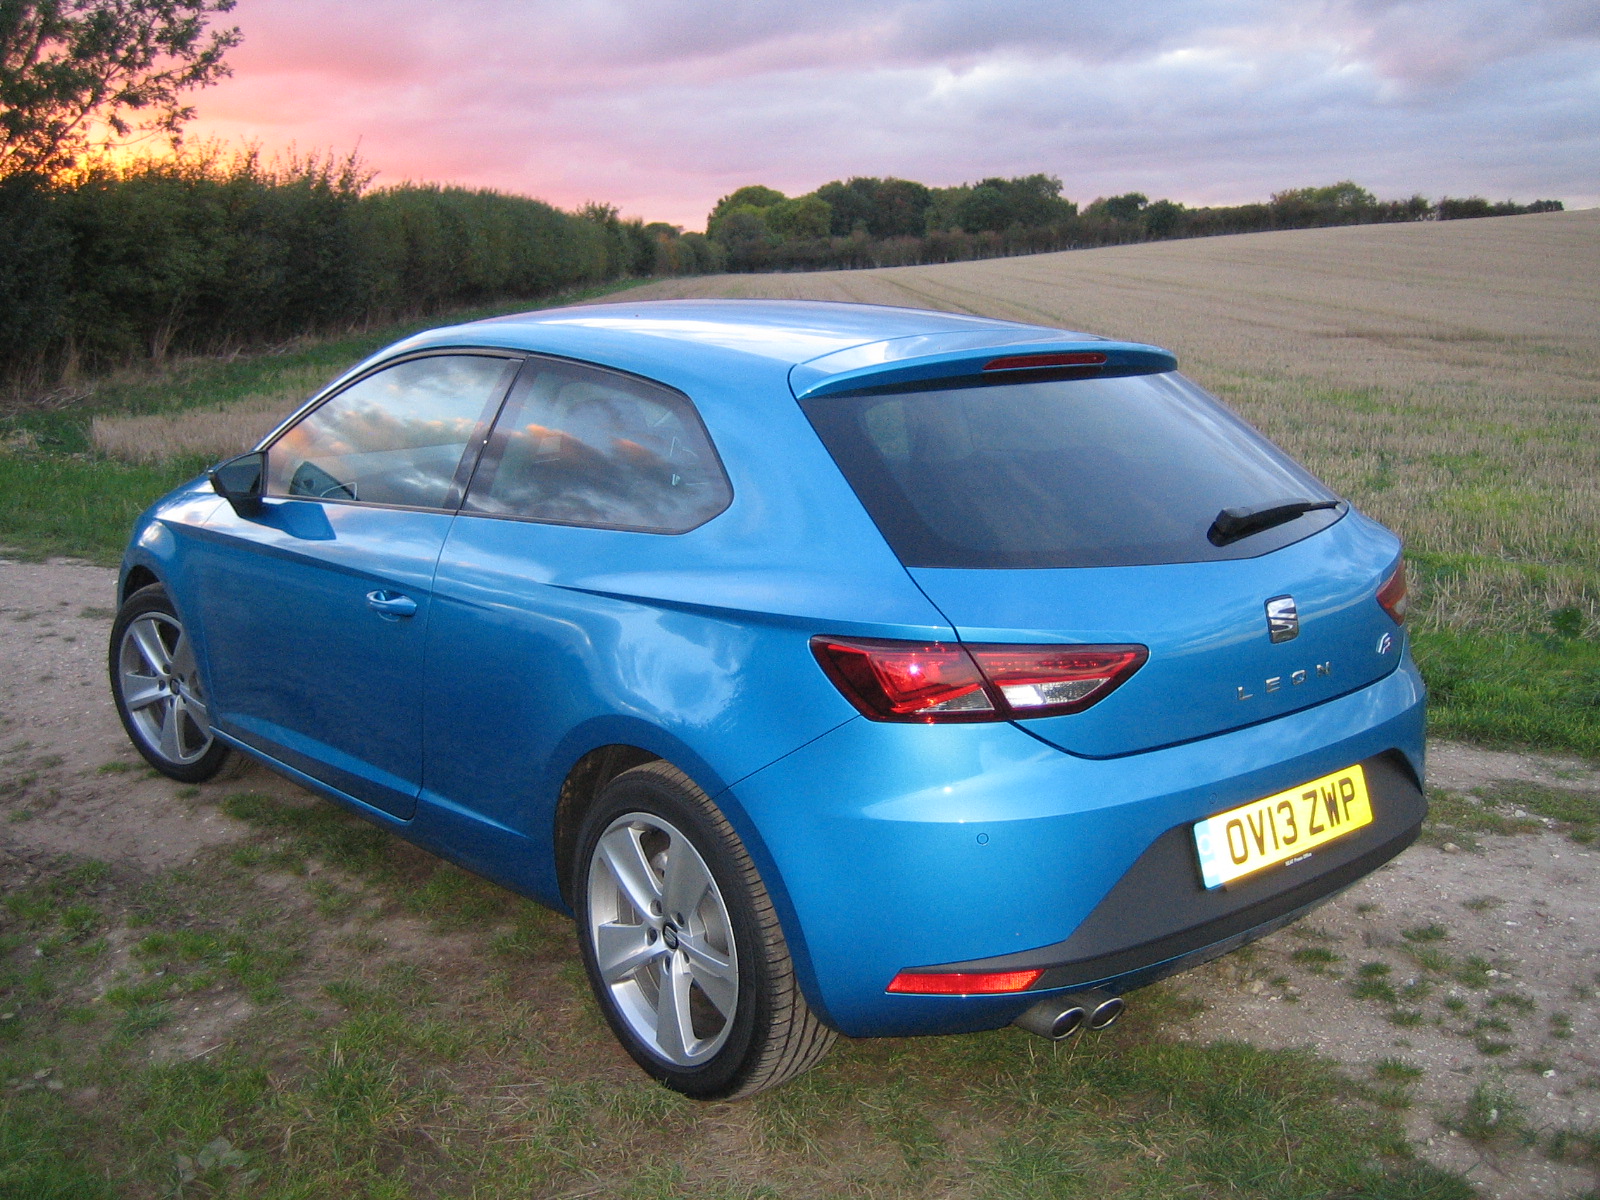 SEAT Leon SC FR 2 0 TDI 150 PS road test review Wheel World Reviews